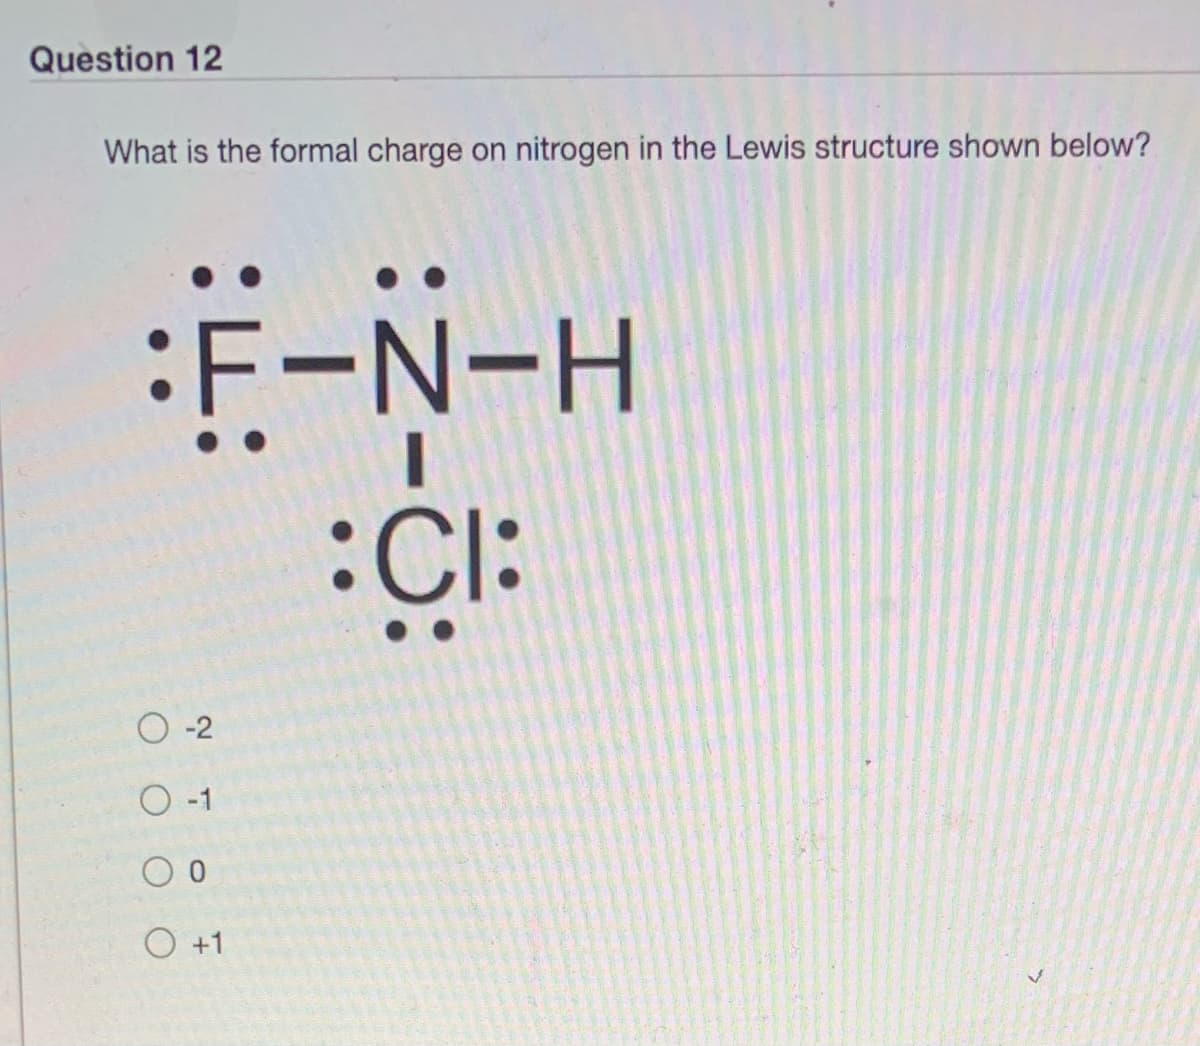 Question 12
What is the formal charge on nitrogen in the Lewis structure shown below?
:F-N-H
:CI:
O -1
O +1
